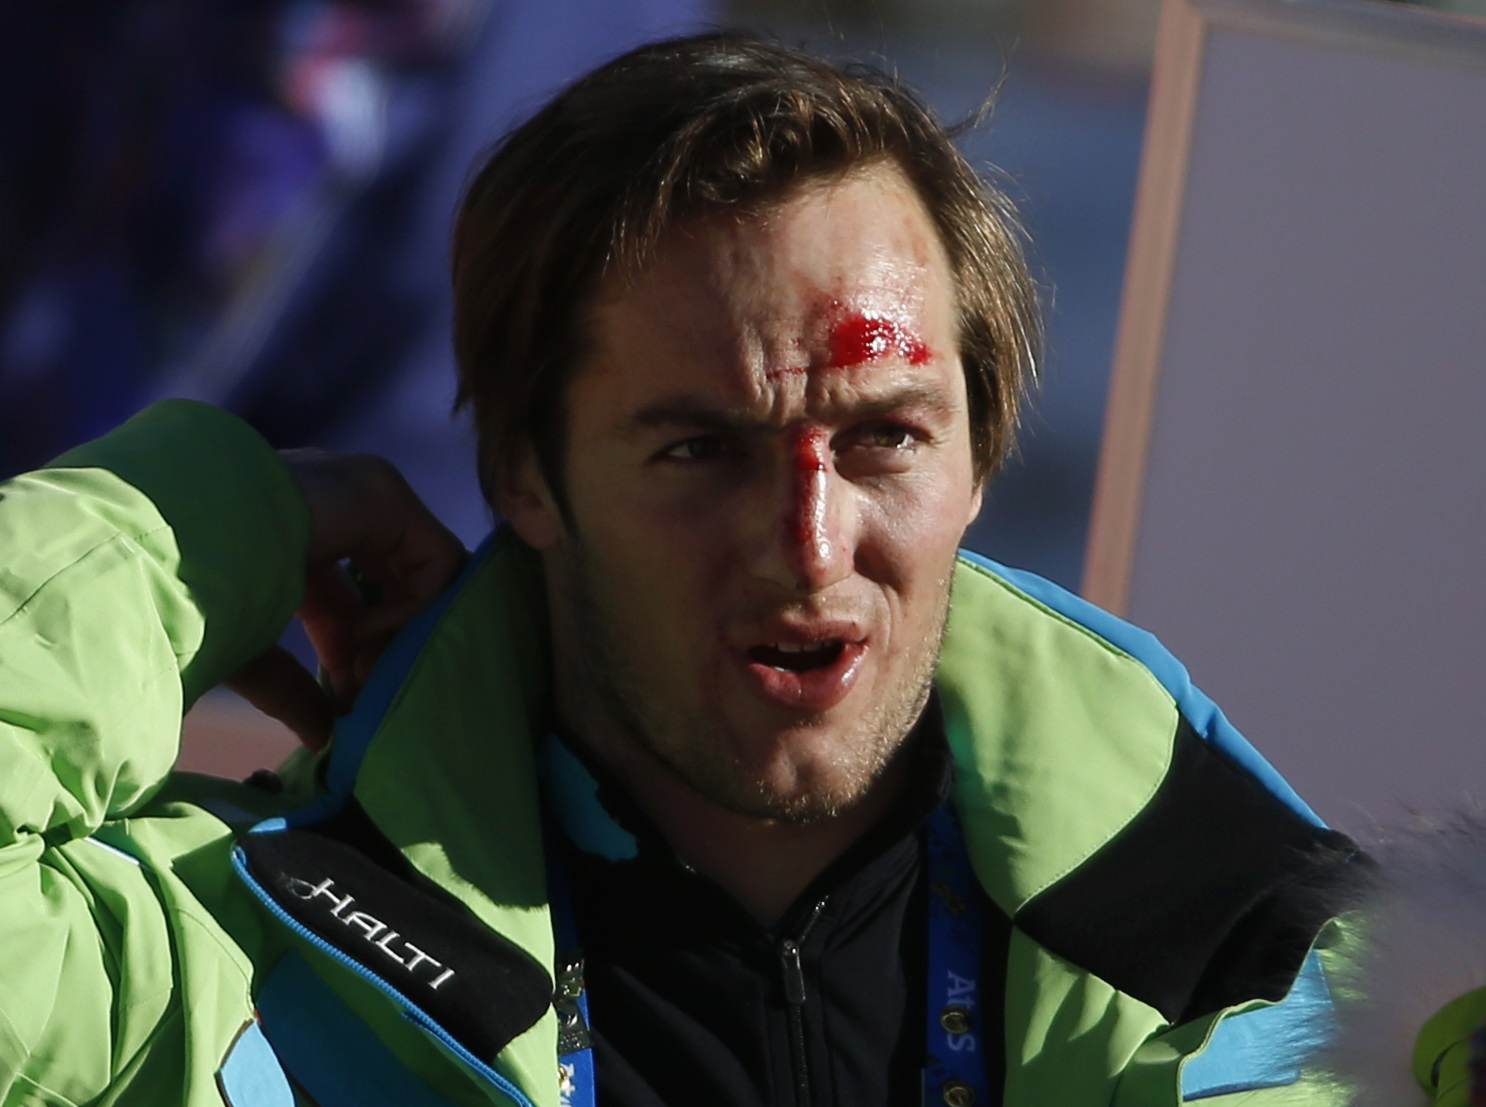 Rok Perko's bloodied face after spill. (Reuters)